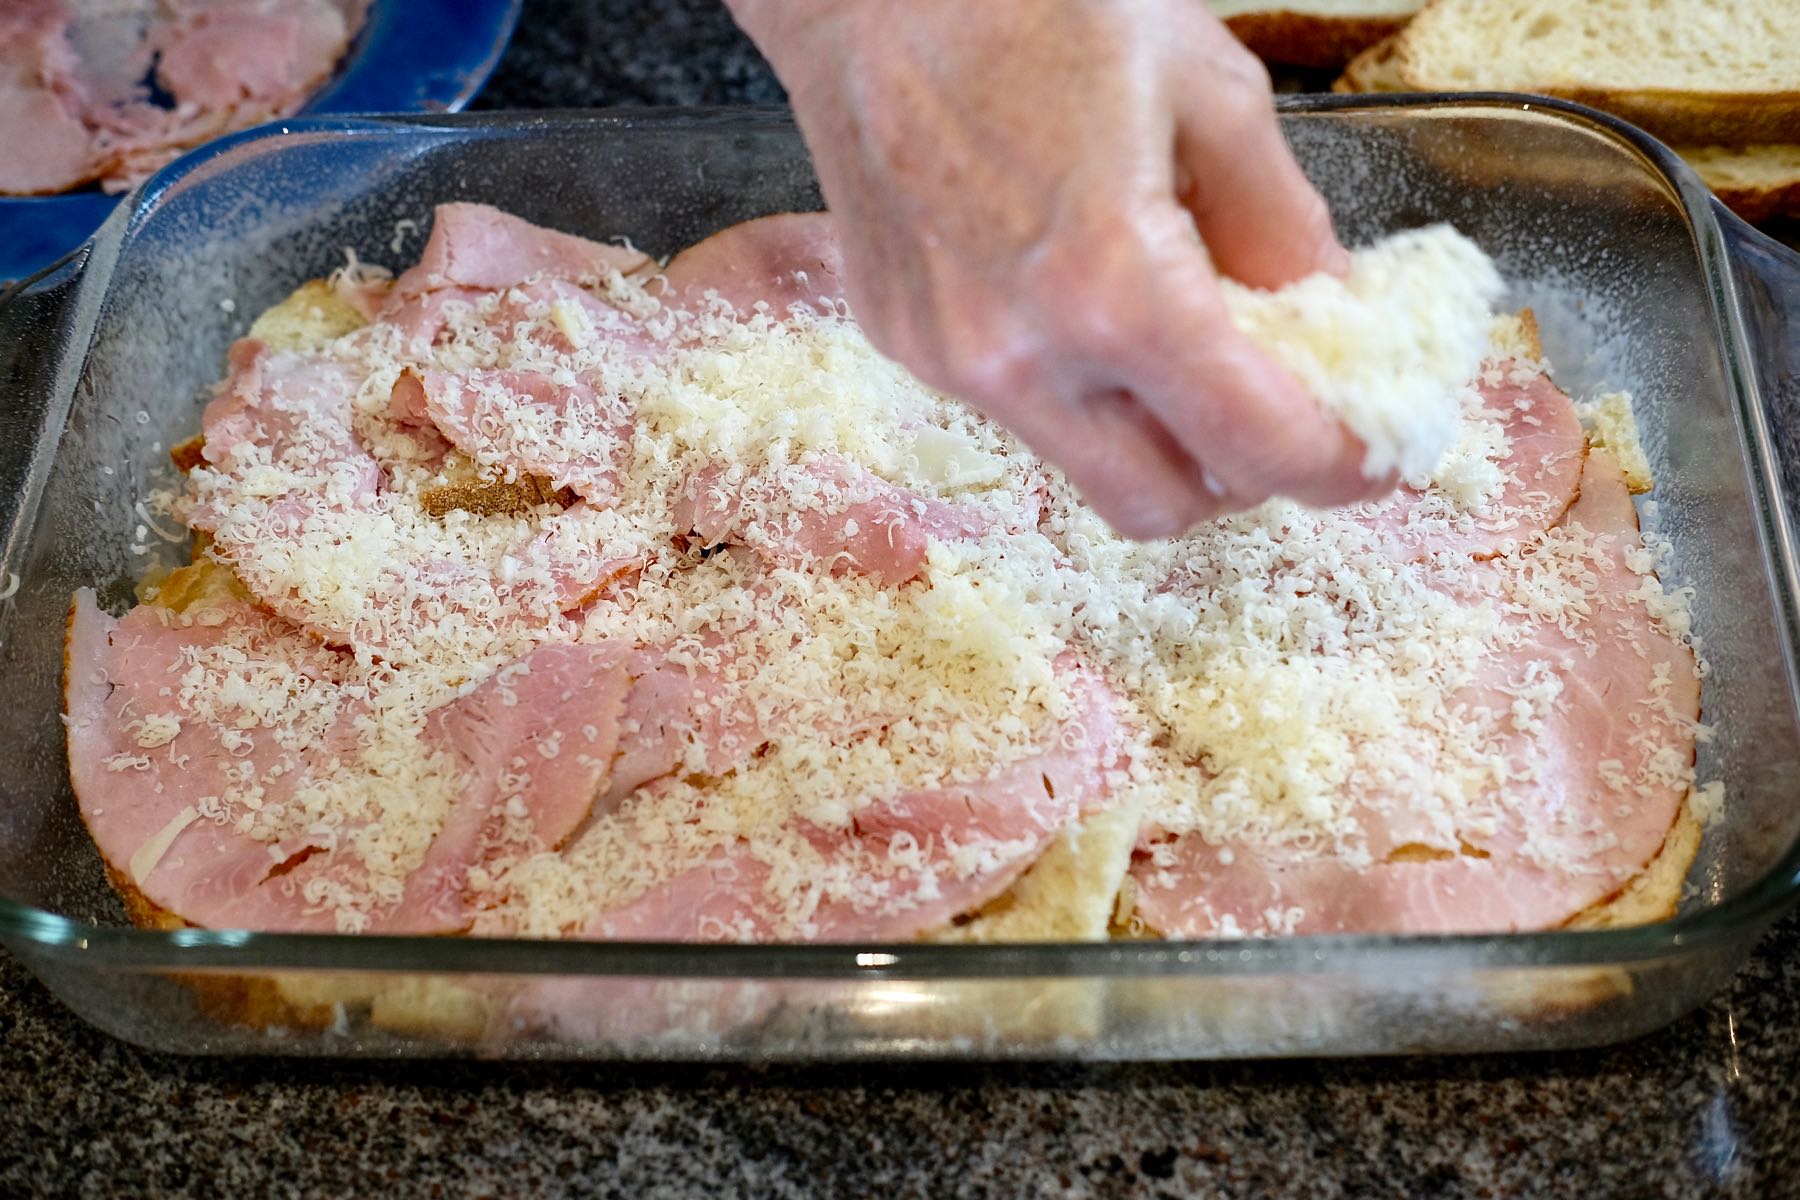 Layering the ham and cheese over first layer of bread in glass baking dish.